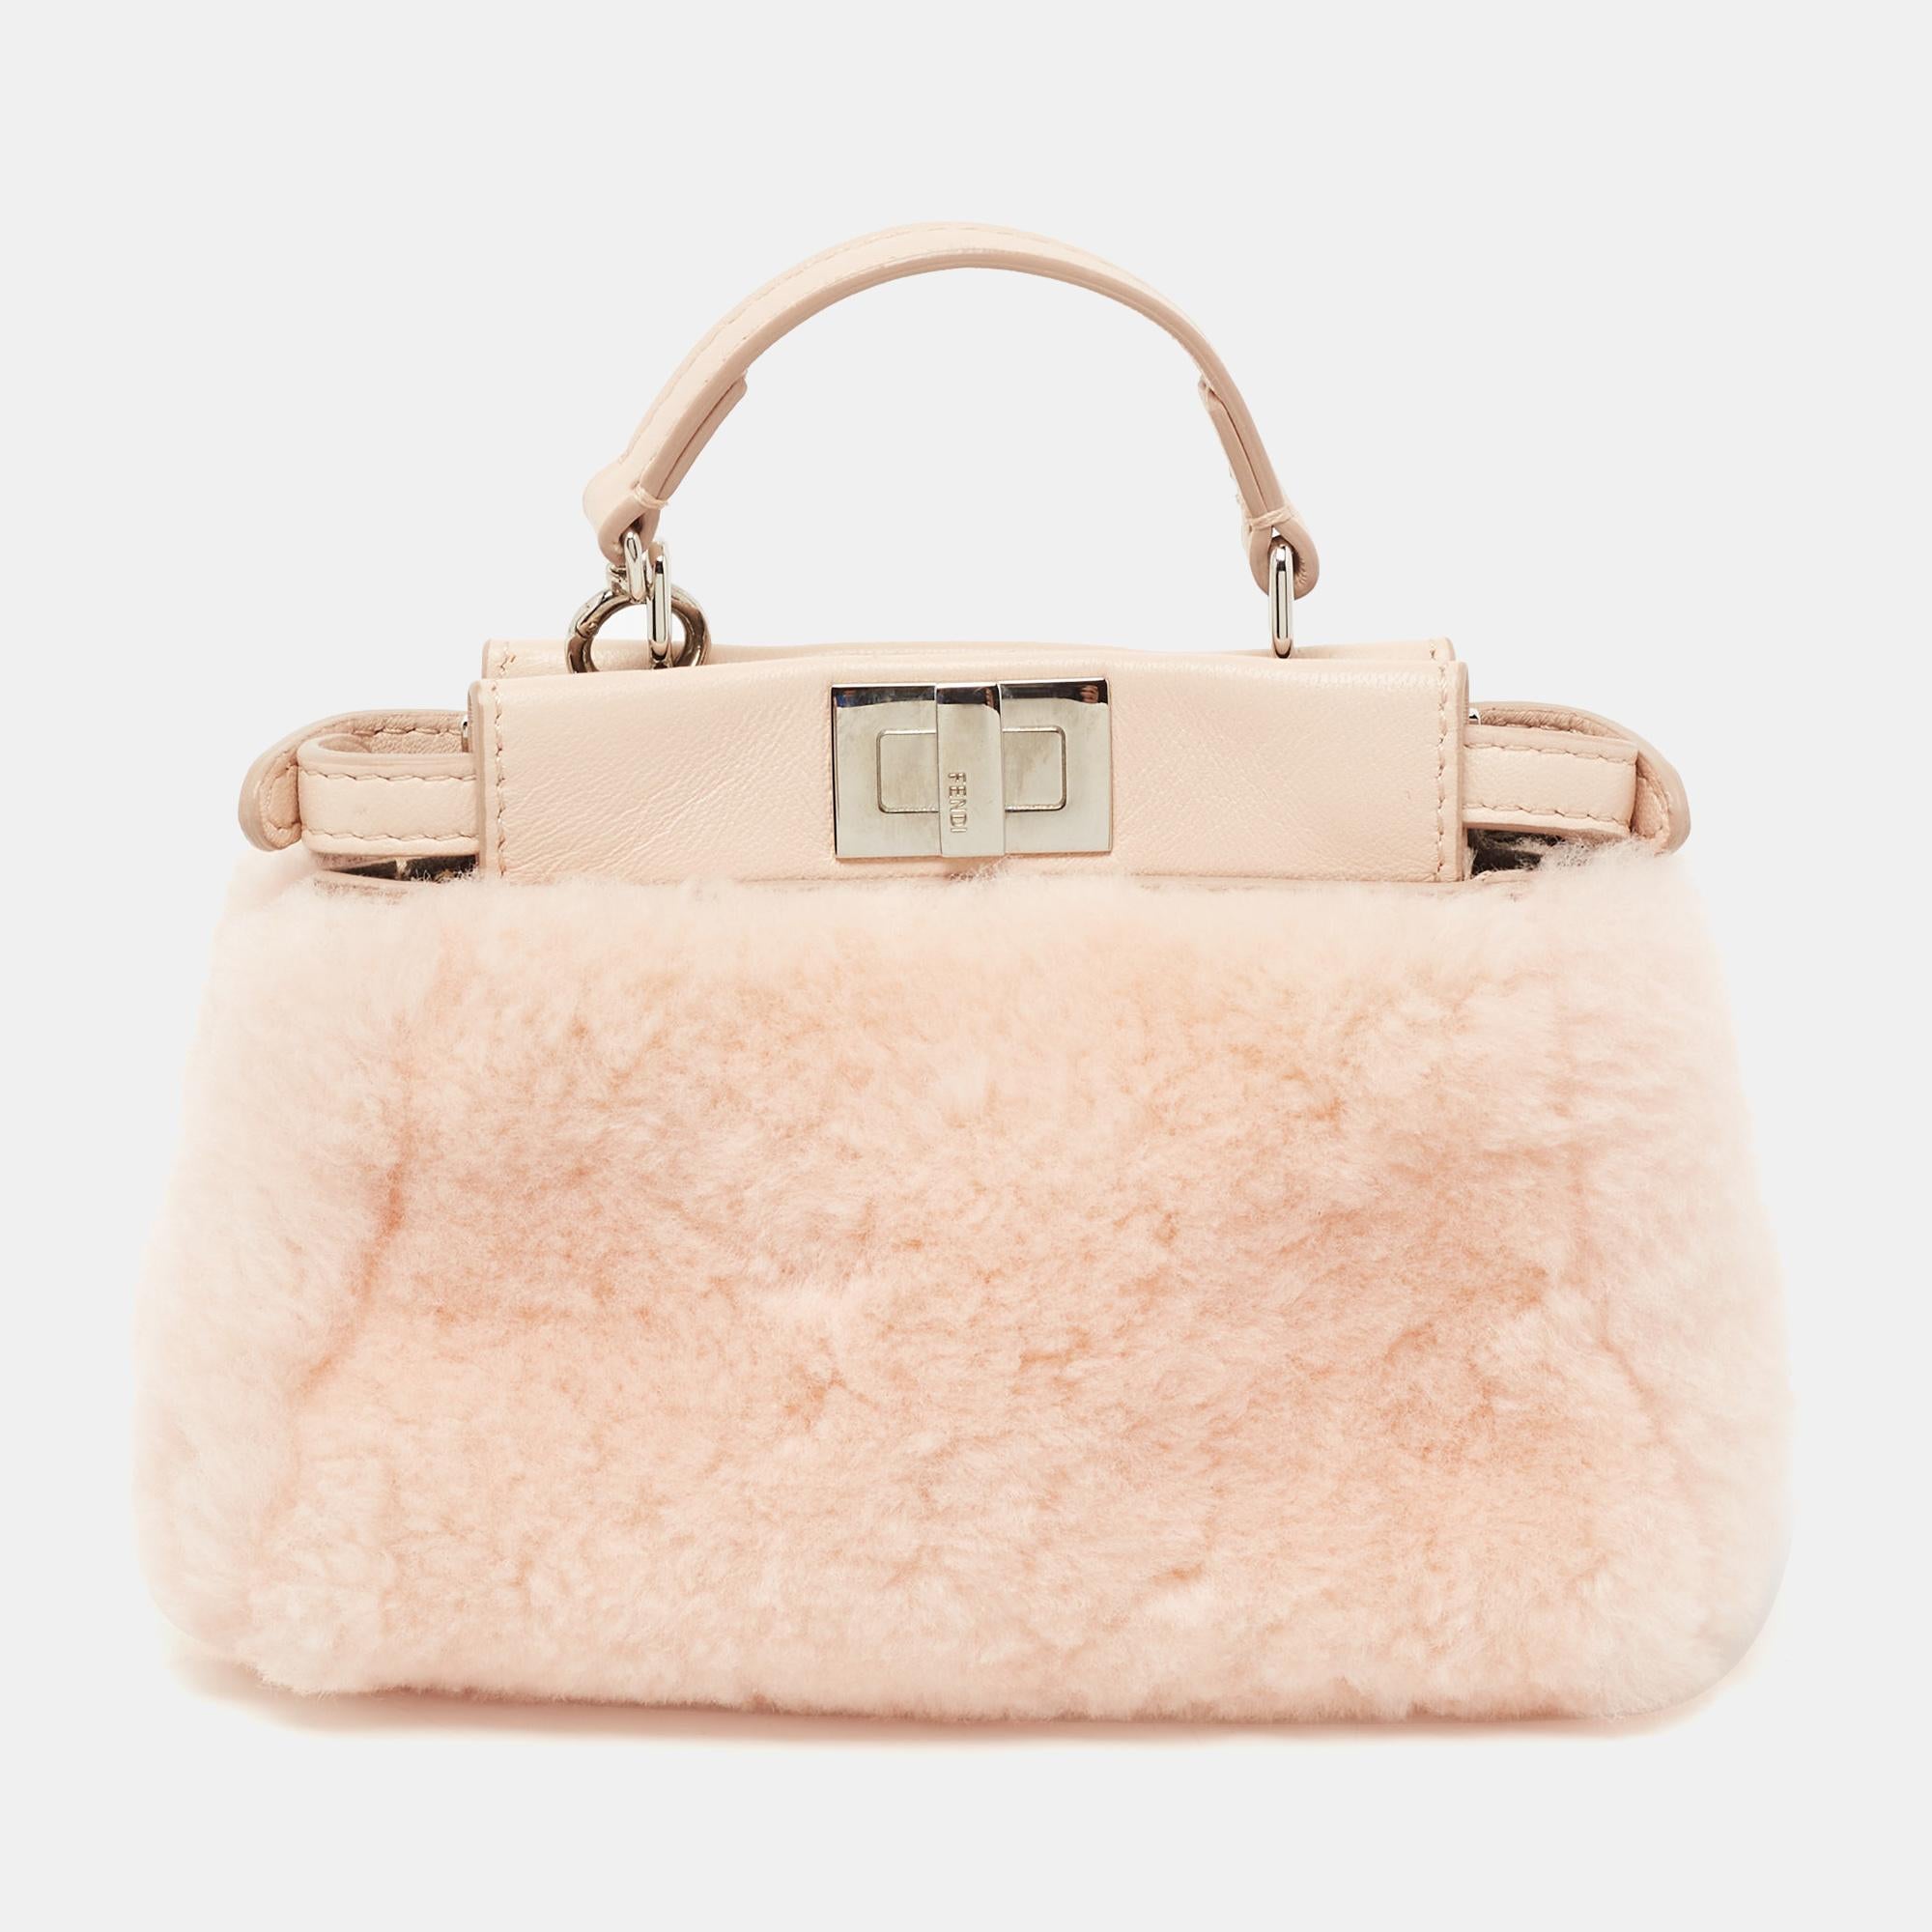 Fendi is synonymous with luxurious style. This Peekaboo bag is crafted with Shearling and leather and features silver-tone hardware and a top handle. Its twist-lock closure opens to a suede interior. The powder pink bag will be perfect for quick